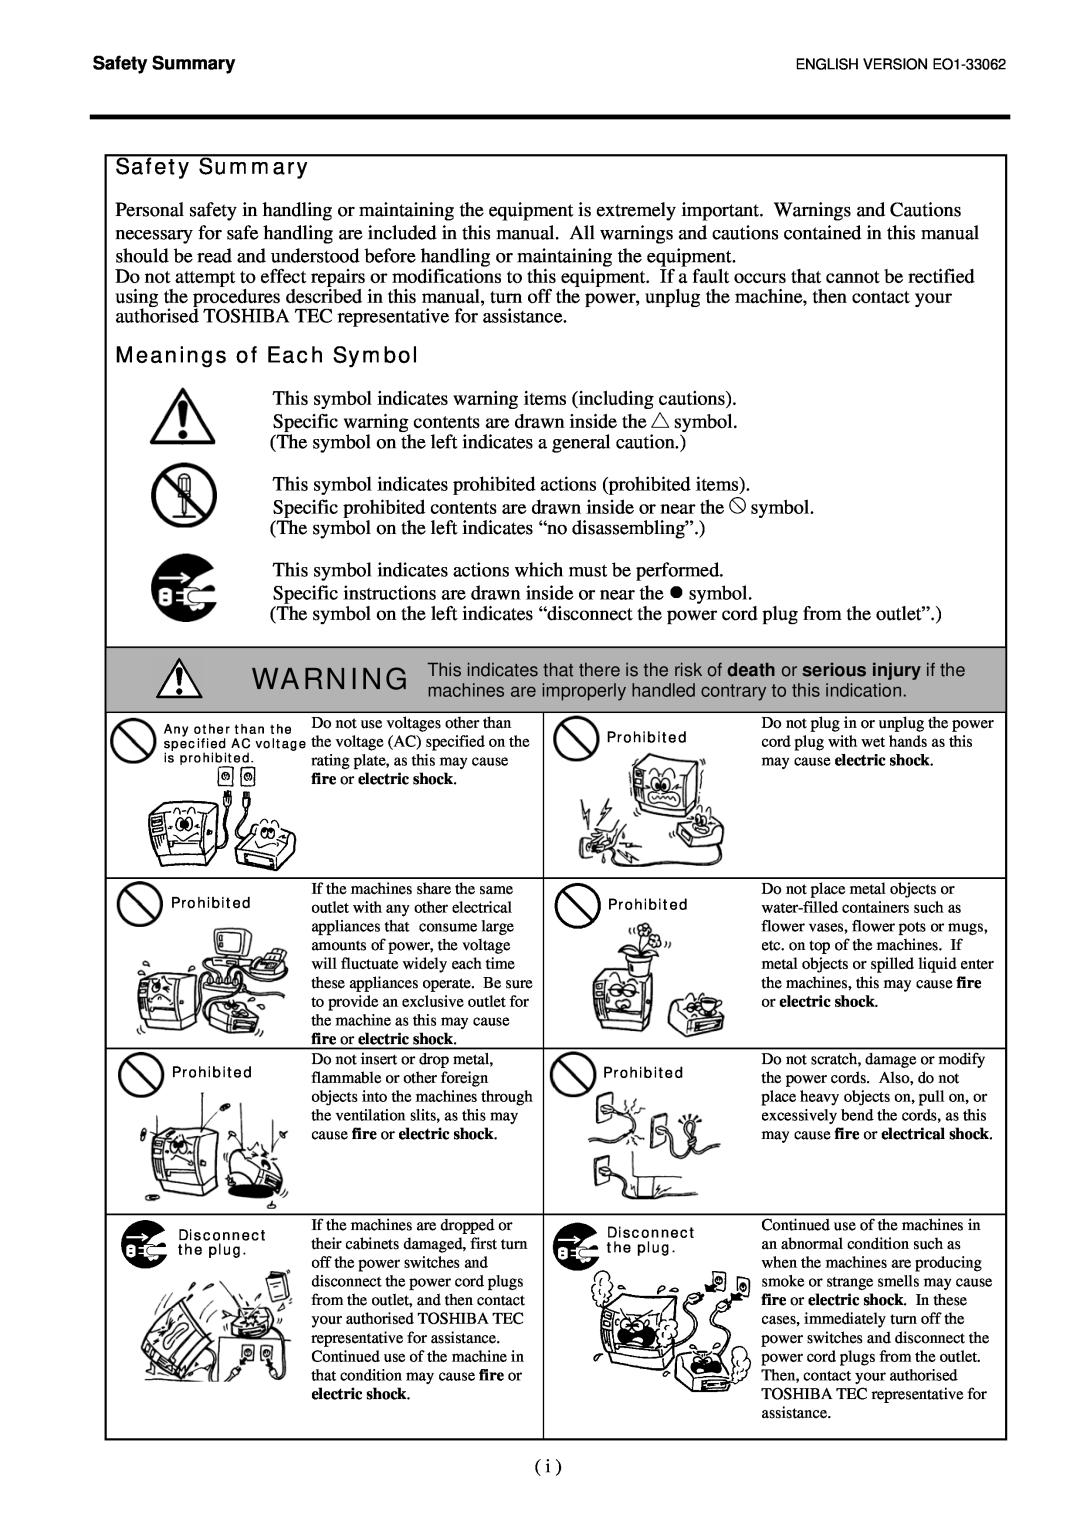 Toshiba B-SV4T owner manual Safety Summary, Meanings of Each Symbol 